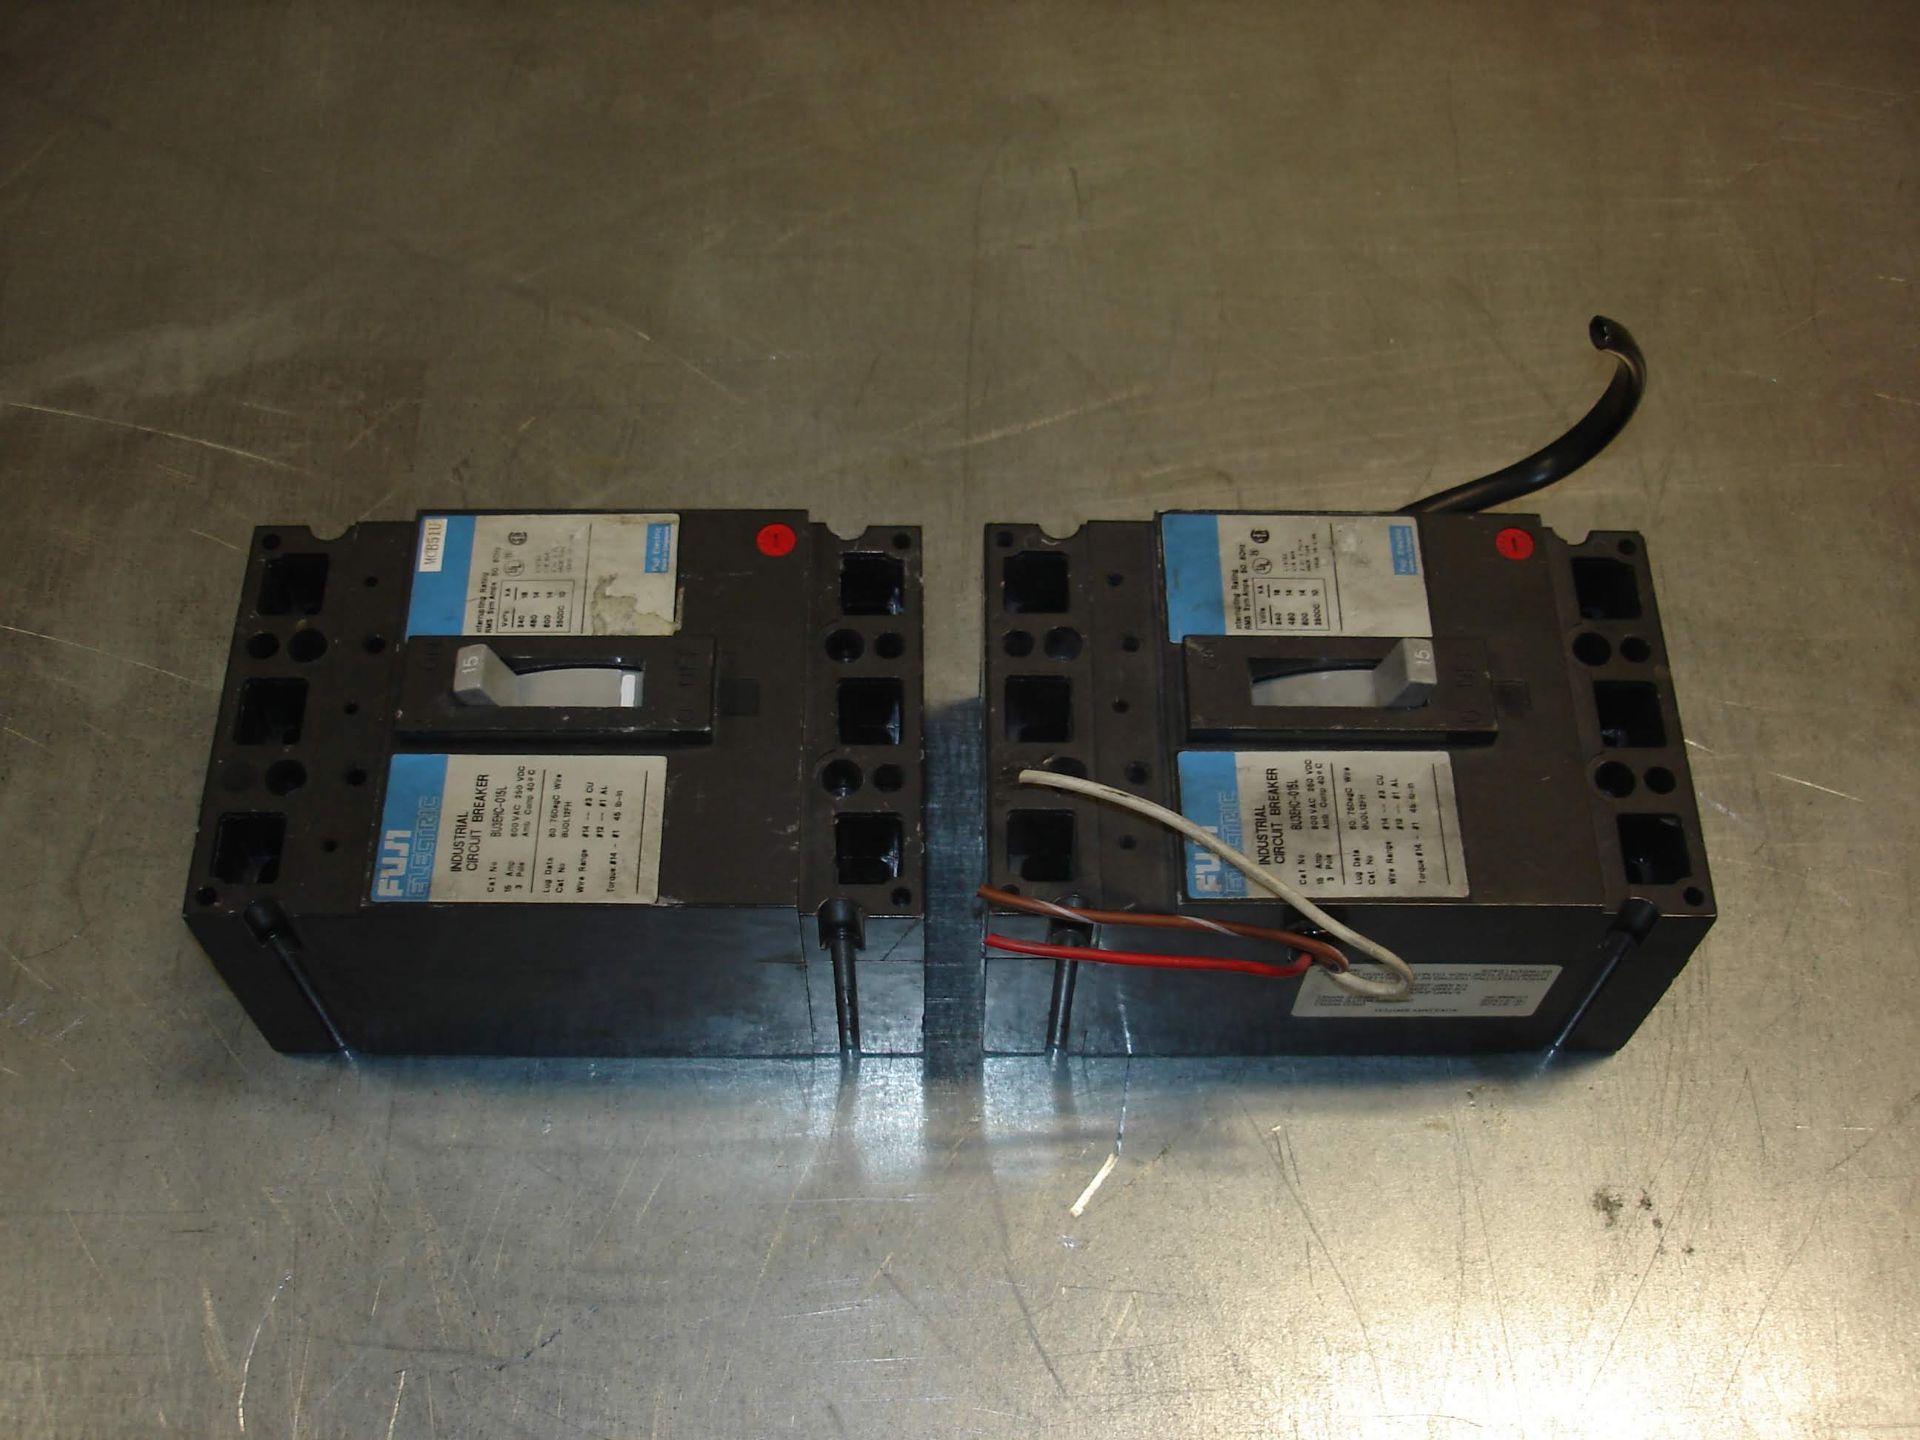 (2) BU3EHC-015L FUJI ELECTRIC INDUSTRIAL CIRCUIT BREAKER USED Pickup your lot(s) for free! - Image 3 of 5